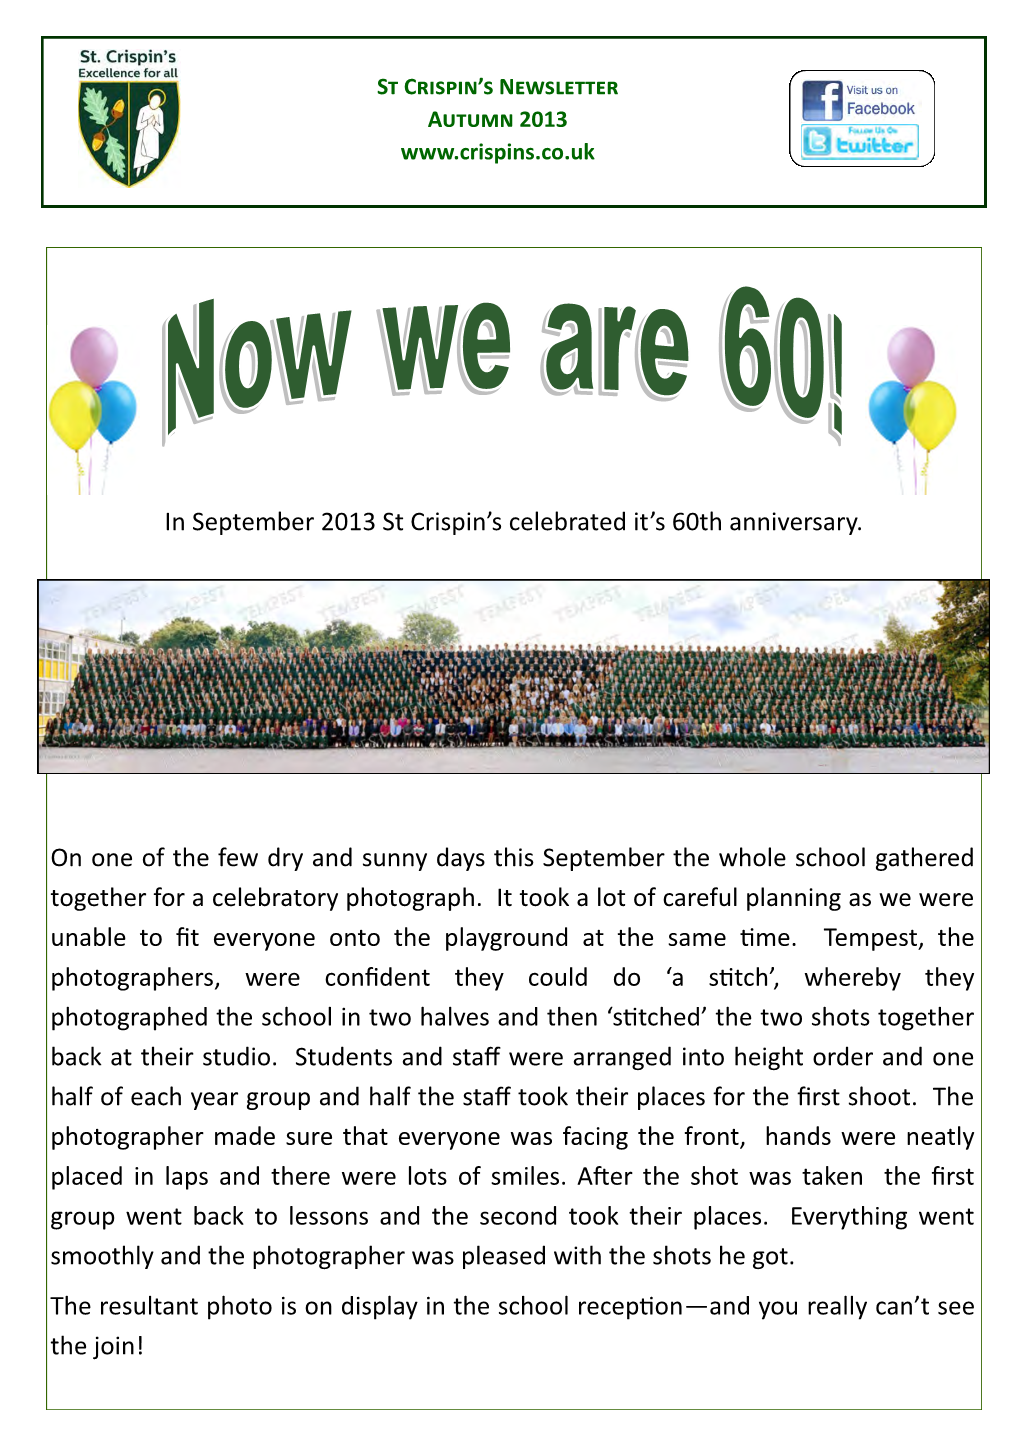 On One of the Few Dry and Sunny Days This September the Whole School Gathered Together for a Celebratory Photograph